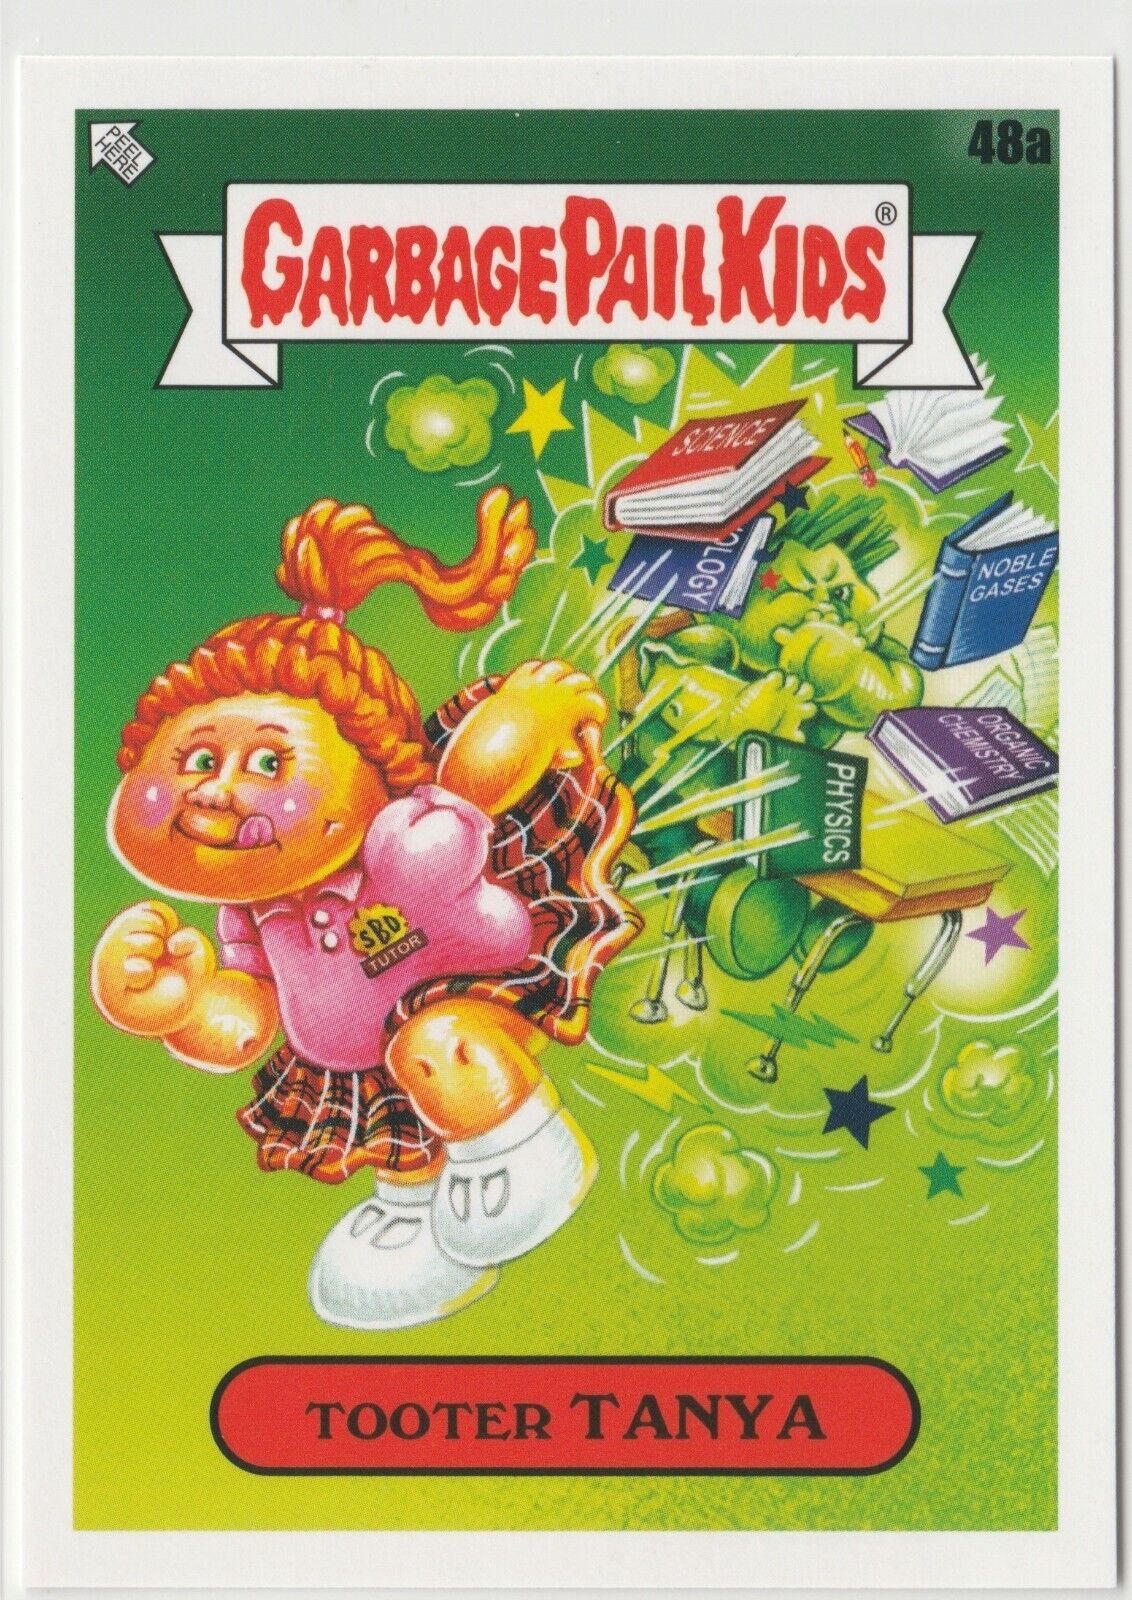 2020 Topps Garbage Pail Kids Late To School Tooter Tanya 48a GPK sticker